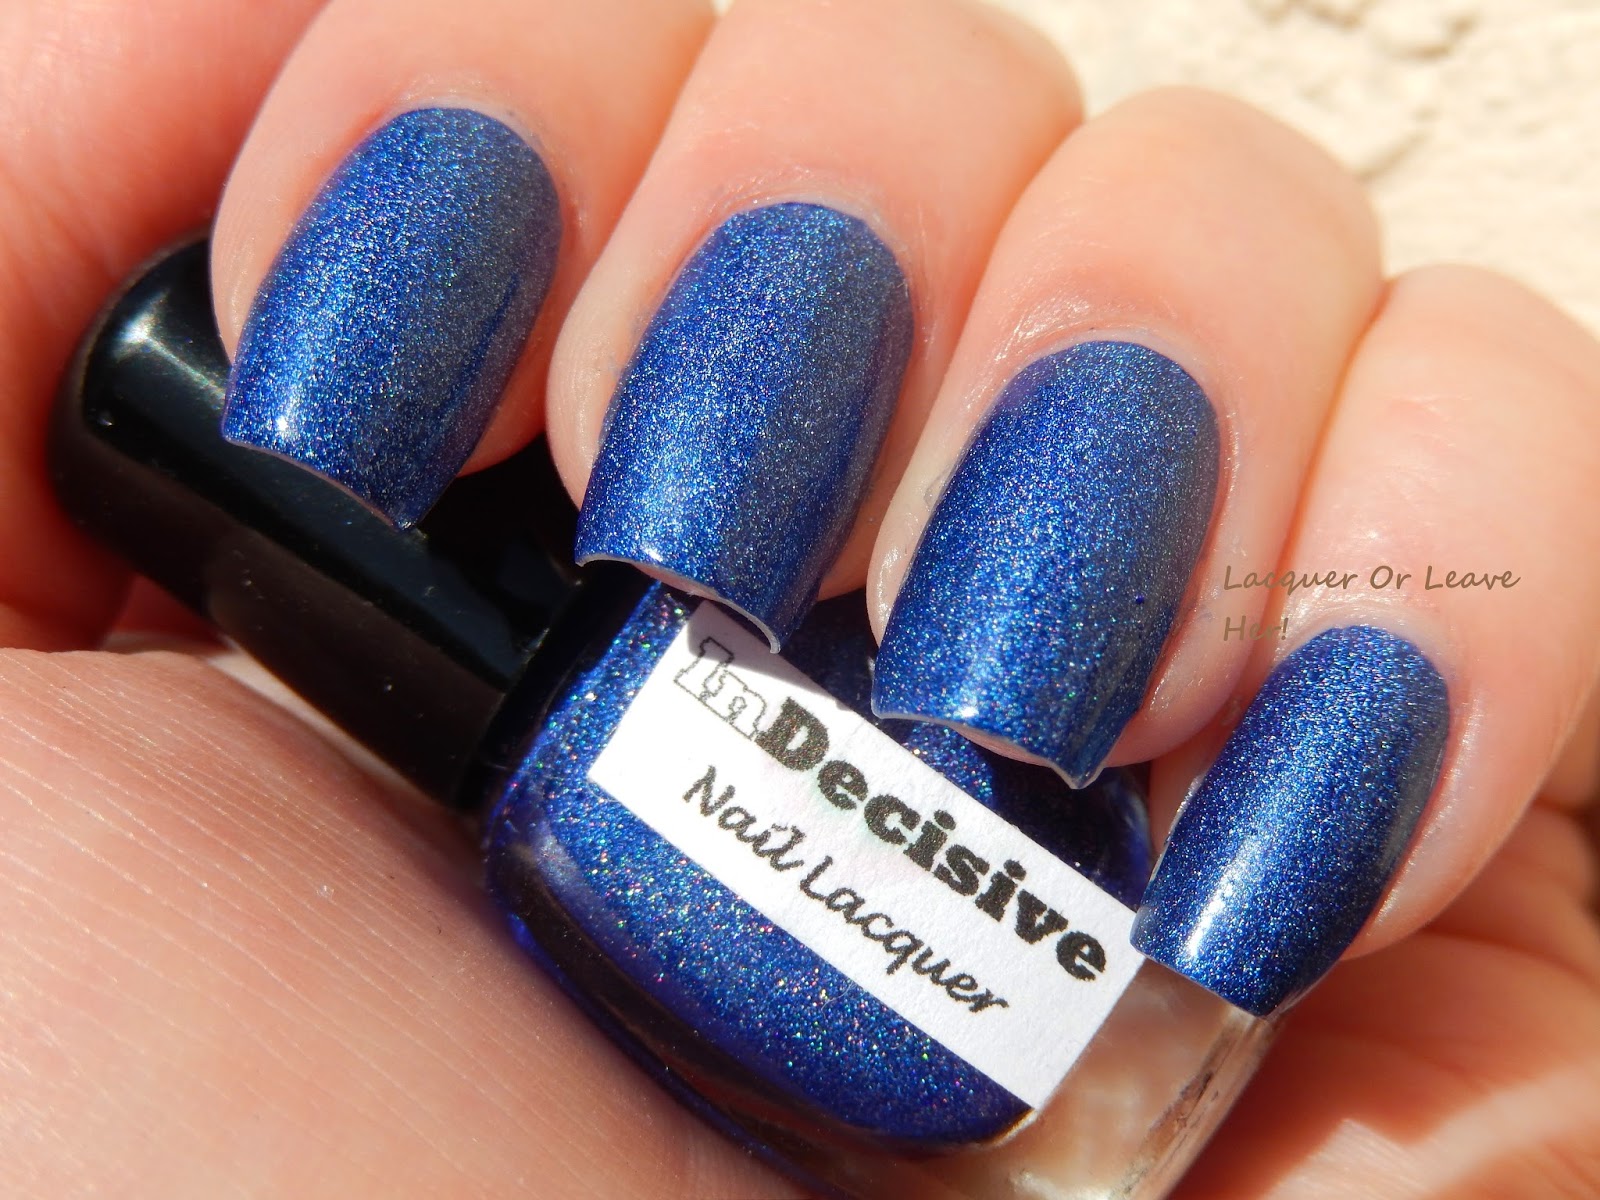 1. OPI Nail Lacquer in "Denim Blue" - wide 7